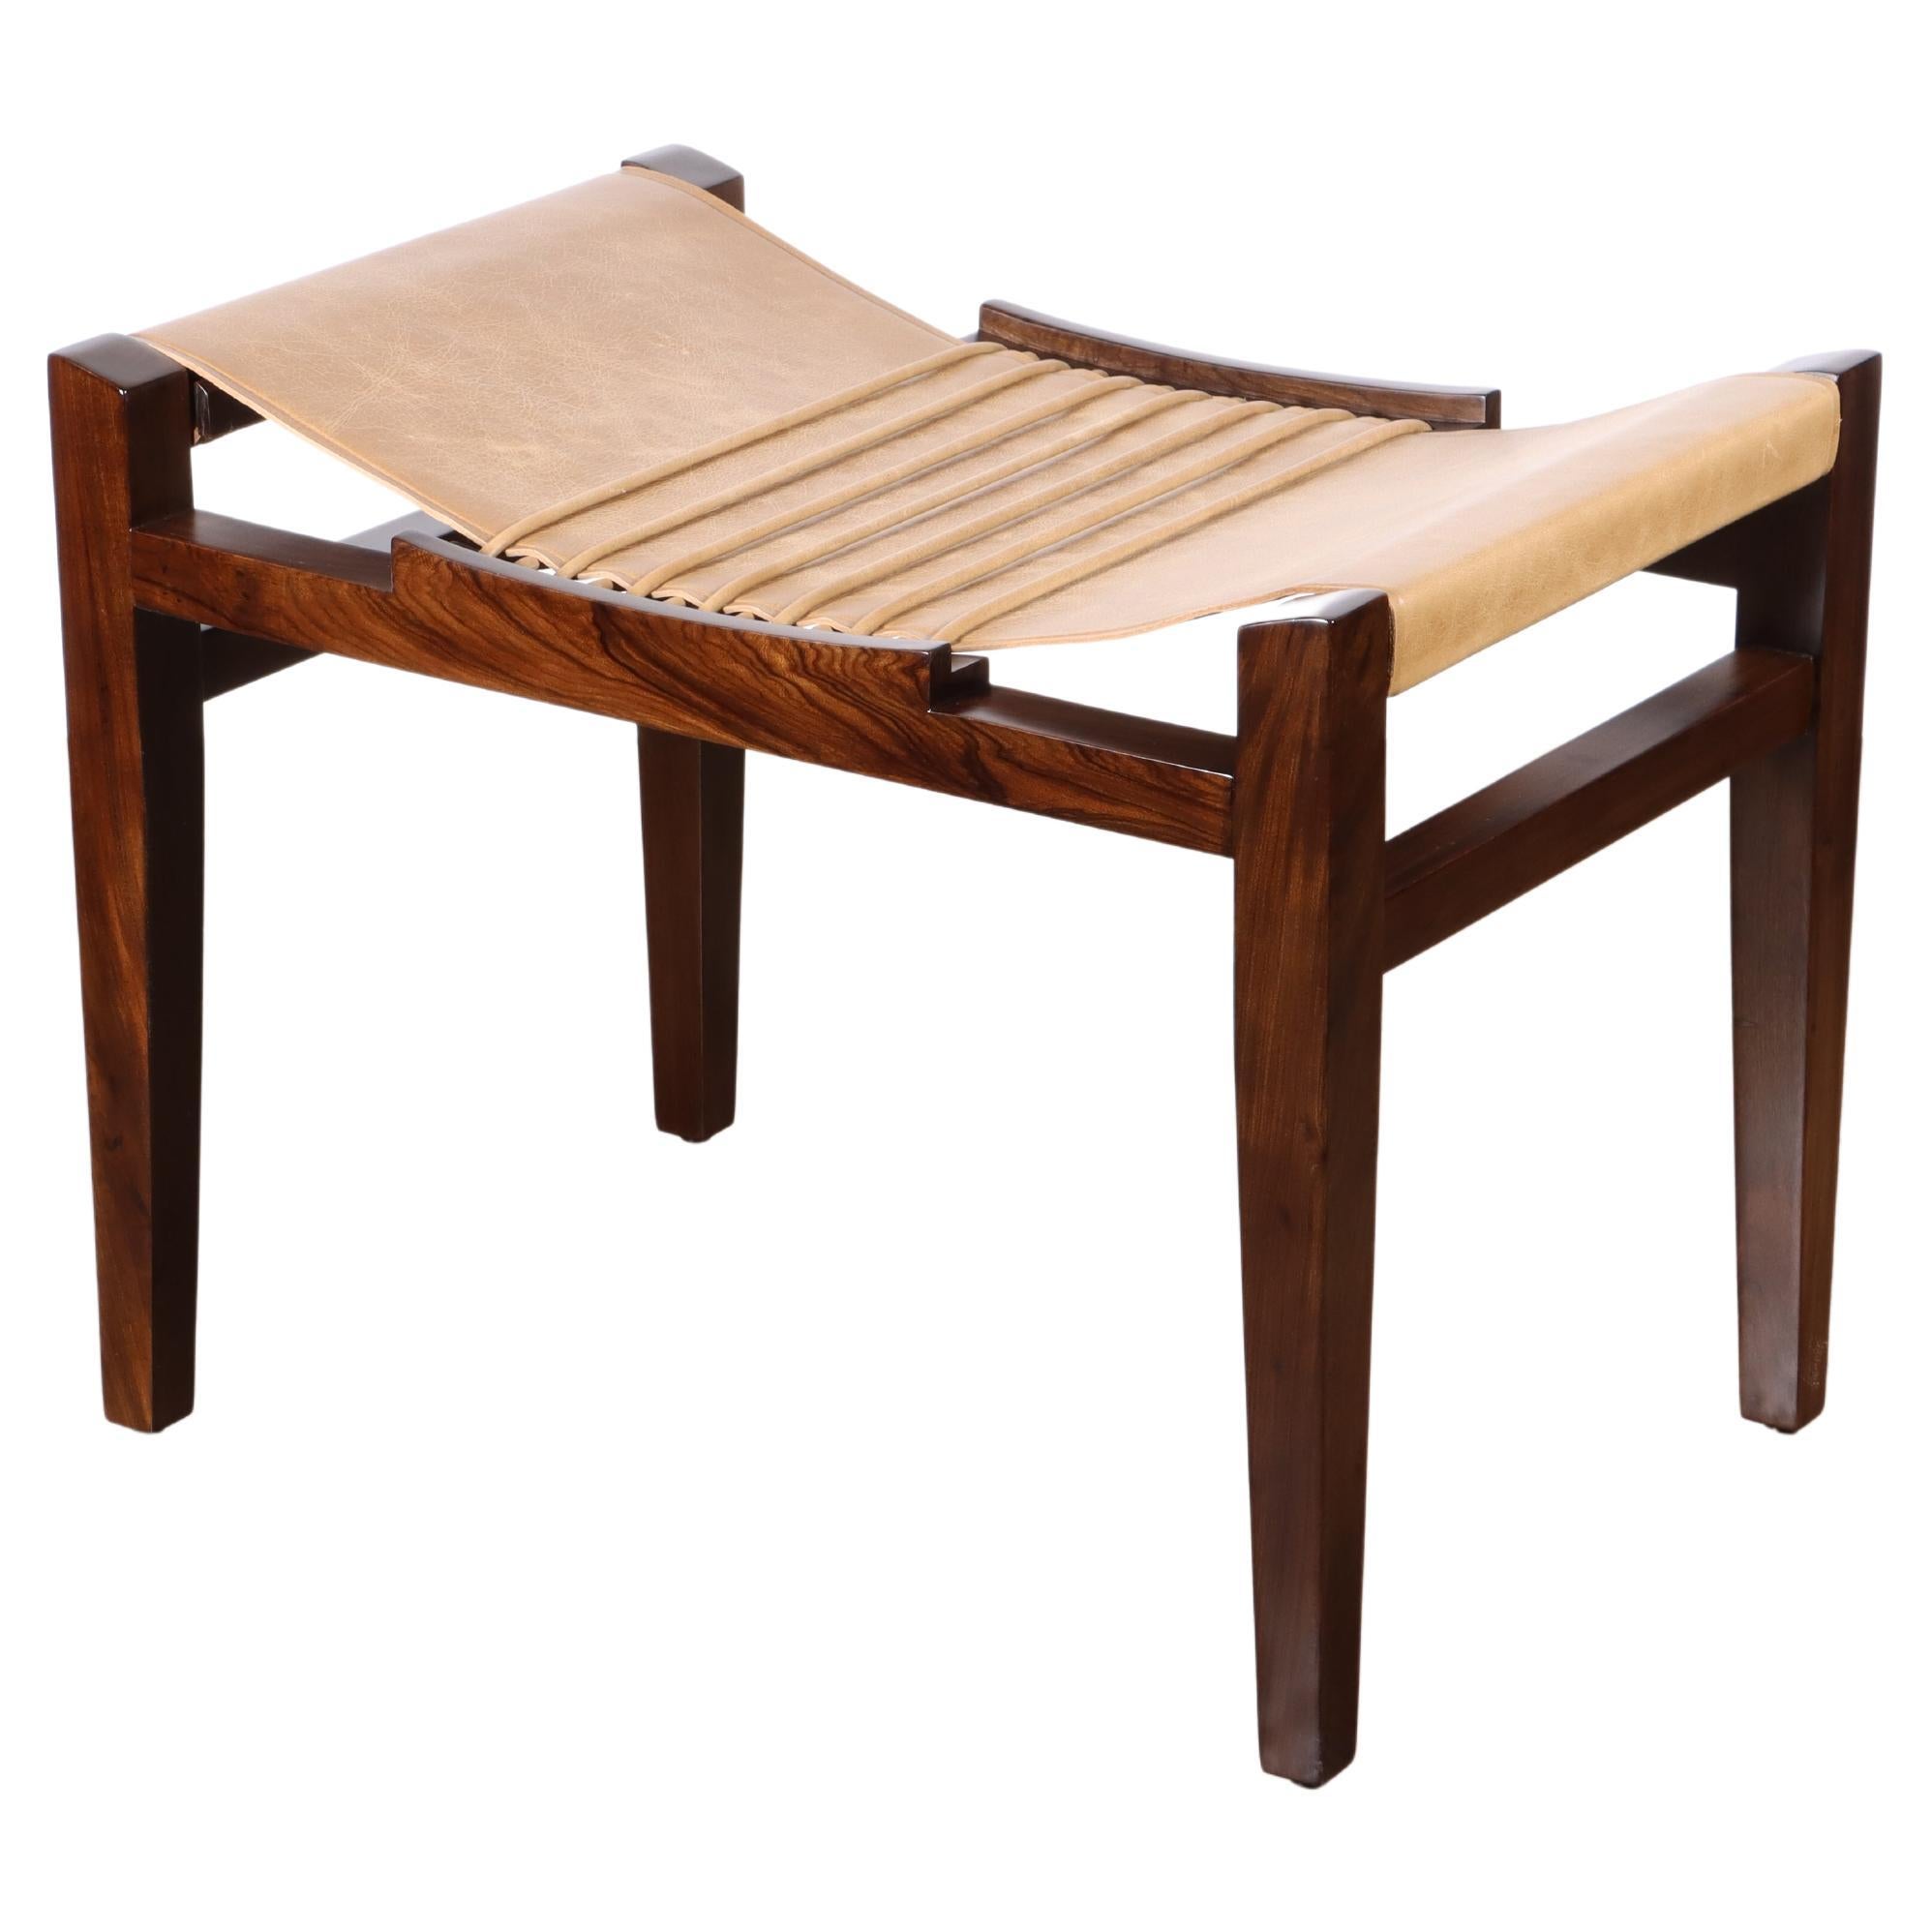 Exotic Wood and Leather Stool in Argentine Rosewood by Costantini Design, Luzio